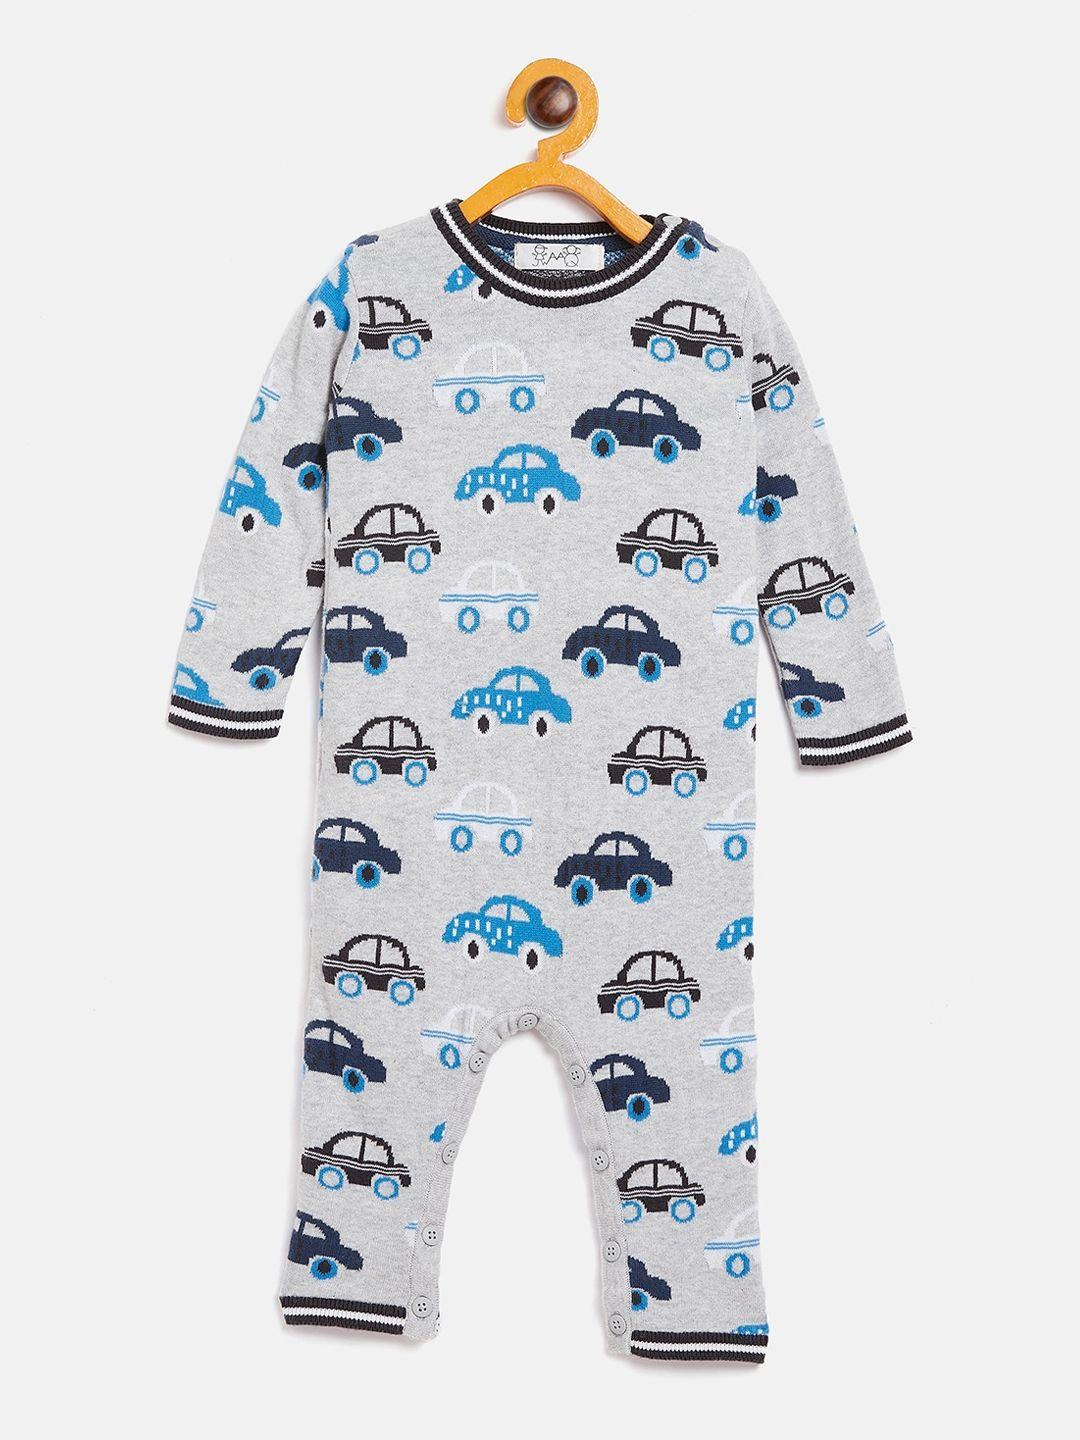 jwaaq infants grey & blue printed pure cotton rompers